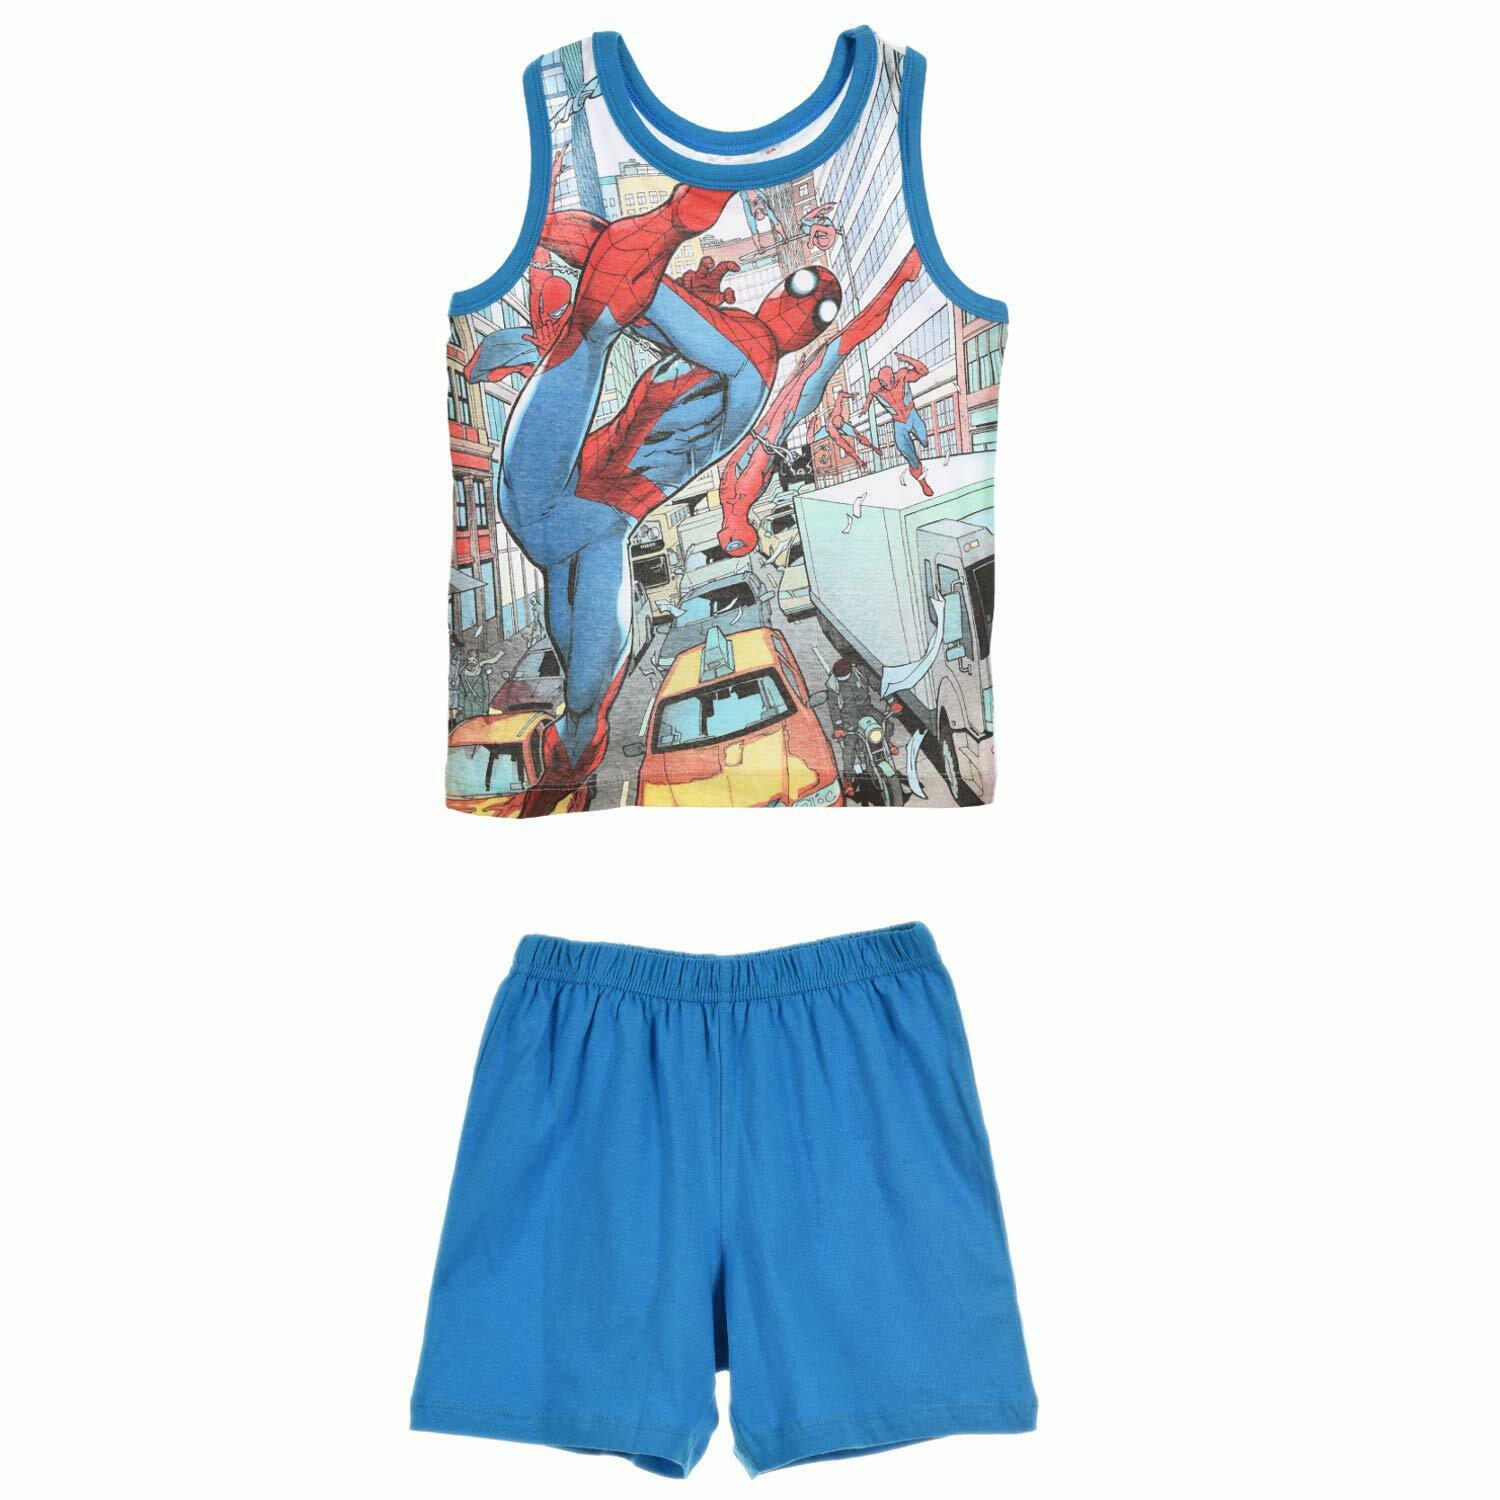 Boys Spiderman Pyjamas. Perfect For Any Spiderman Lover. This Is The Vest Top And Short Set In Blue & White. In Ages 3 To 8. These Are Official Merchandise.